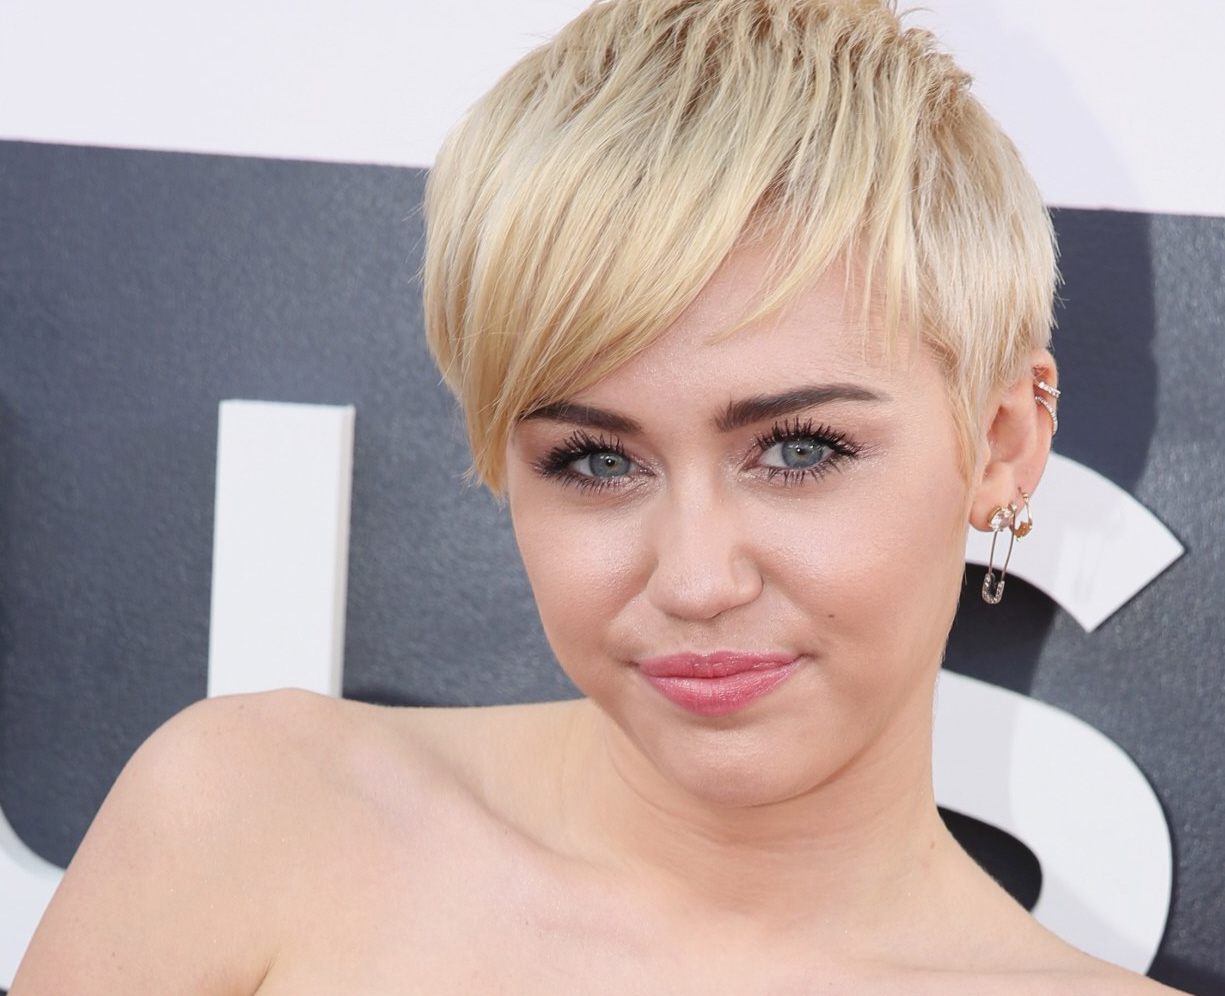 Miley Cyrus in Video Music Awards 2014